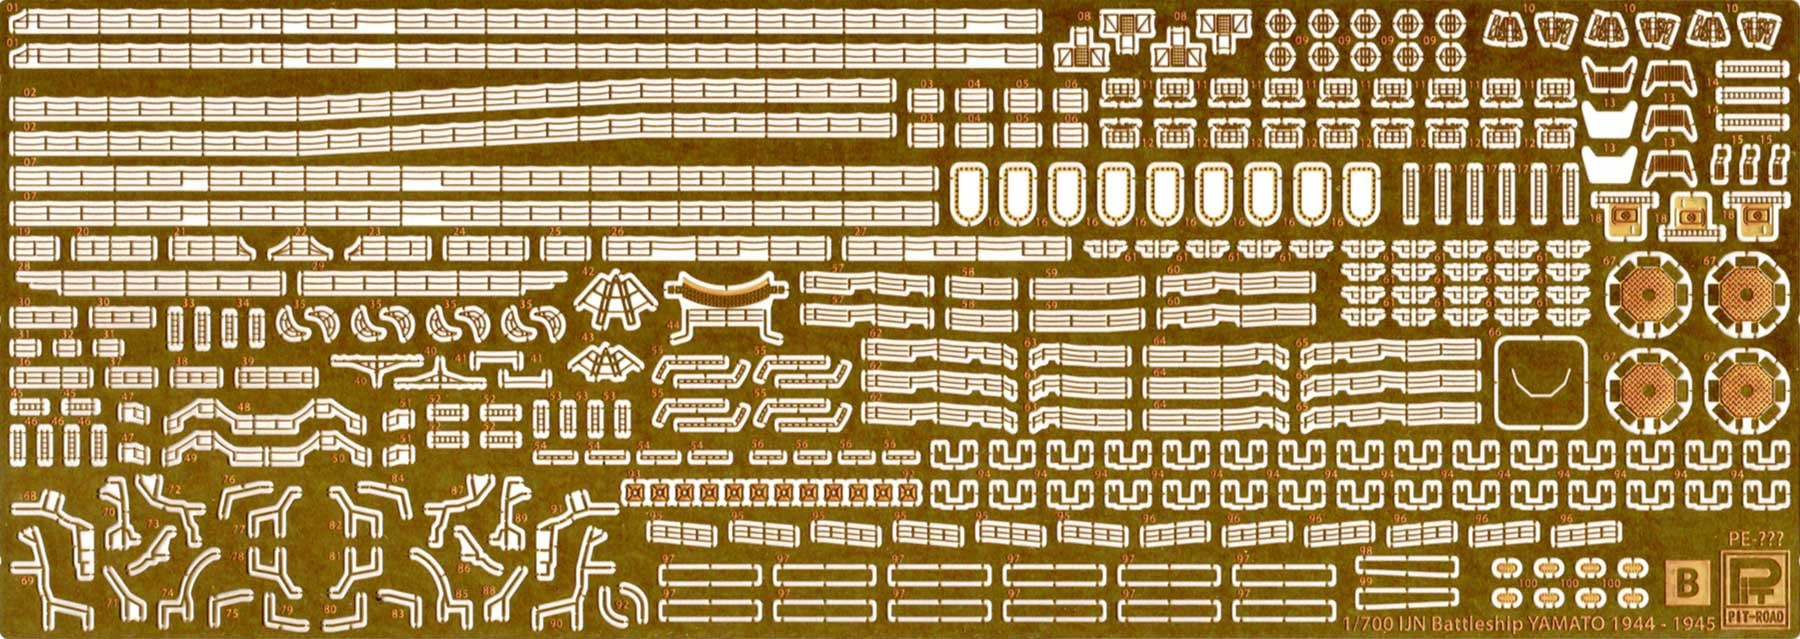 Pit Road 1/700 Detail Up Parts Set For IJN Battleship Yamato (Into Commission)